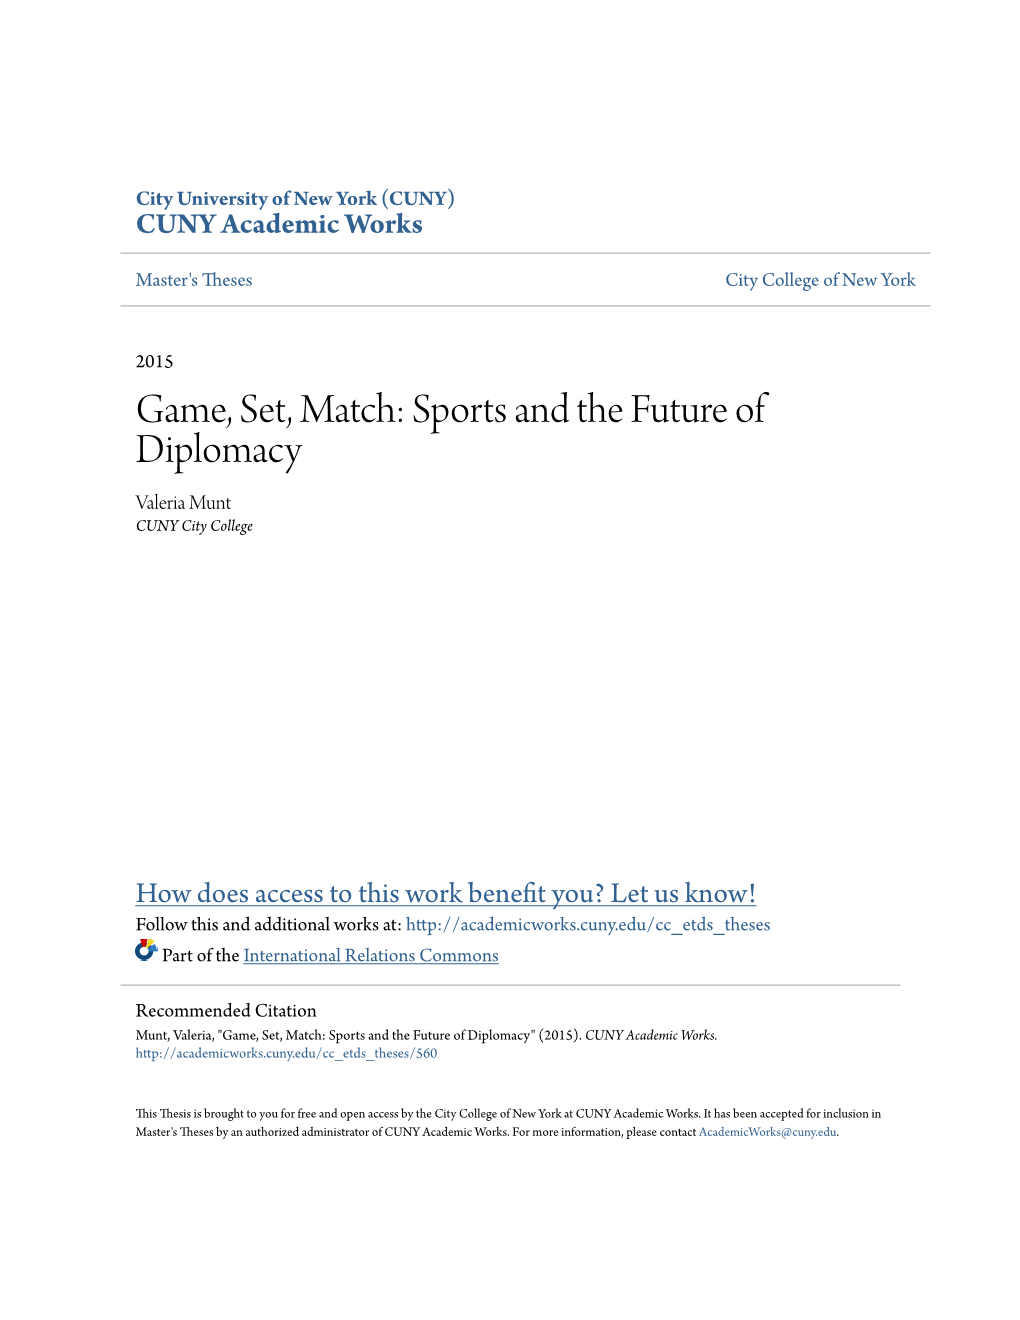 Game, Set, Match: Sports and the Future of Diplomacy Valeria Munt CUNY City College